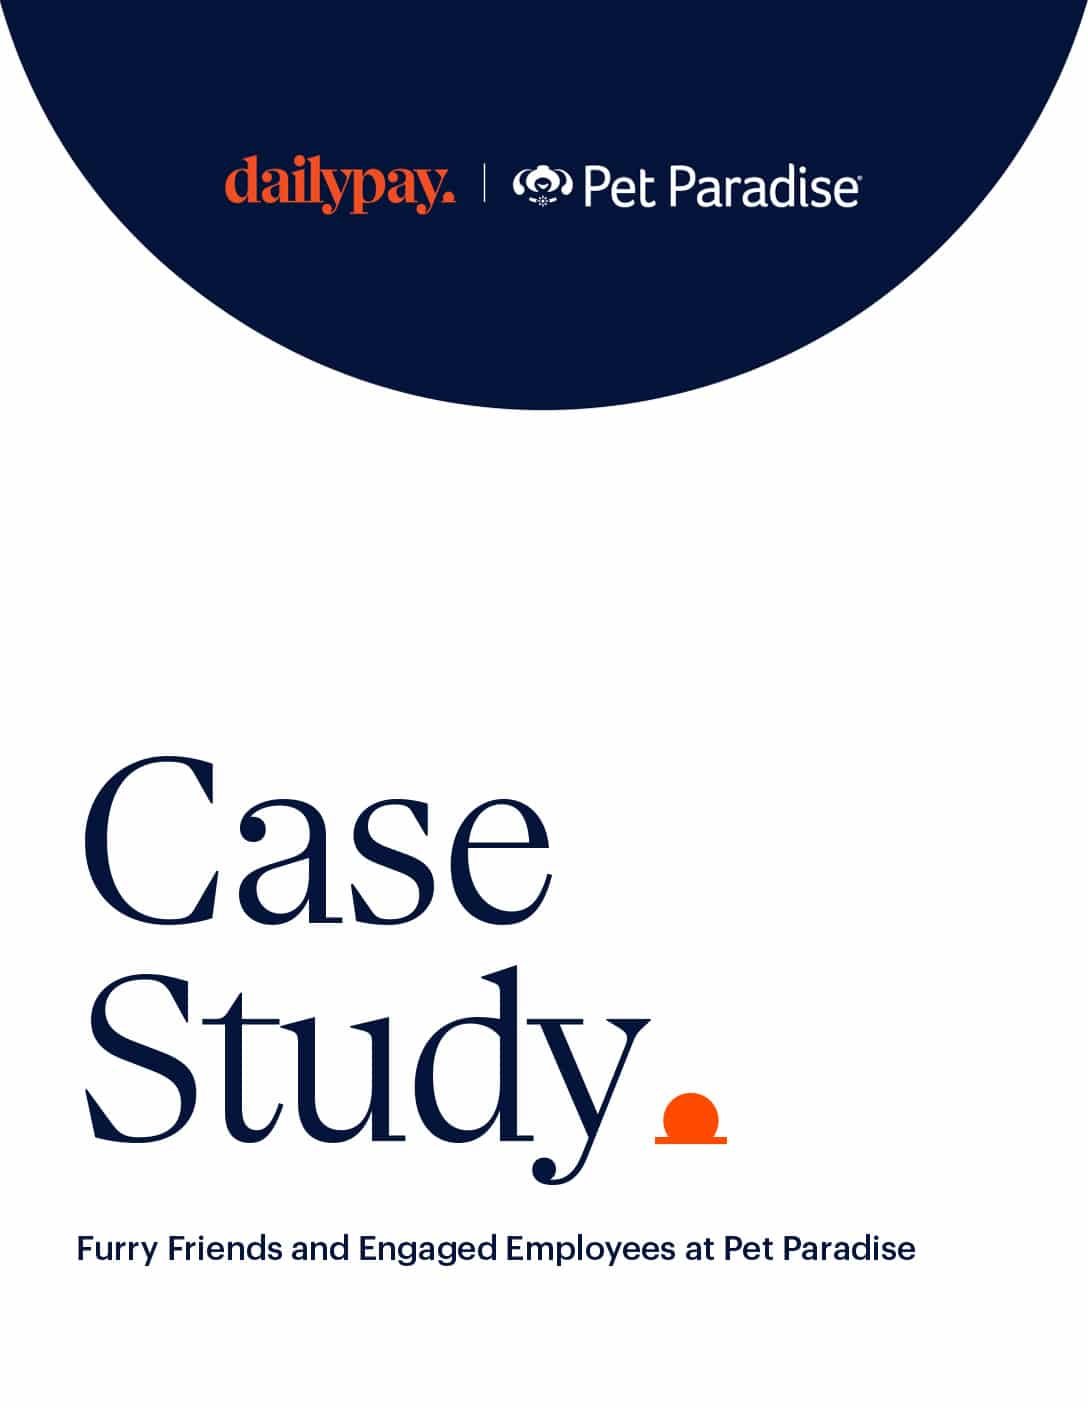 A case study document cover featuring the logos of DailyPay and Pet Paradise at the top against a dark blue background. Below, in large text, "Case Study" is written, followed by the subtitle, "Furry Friends and Engaged Employees at Pet Paradise" against a white background.